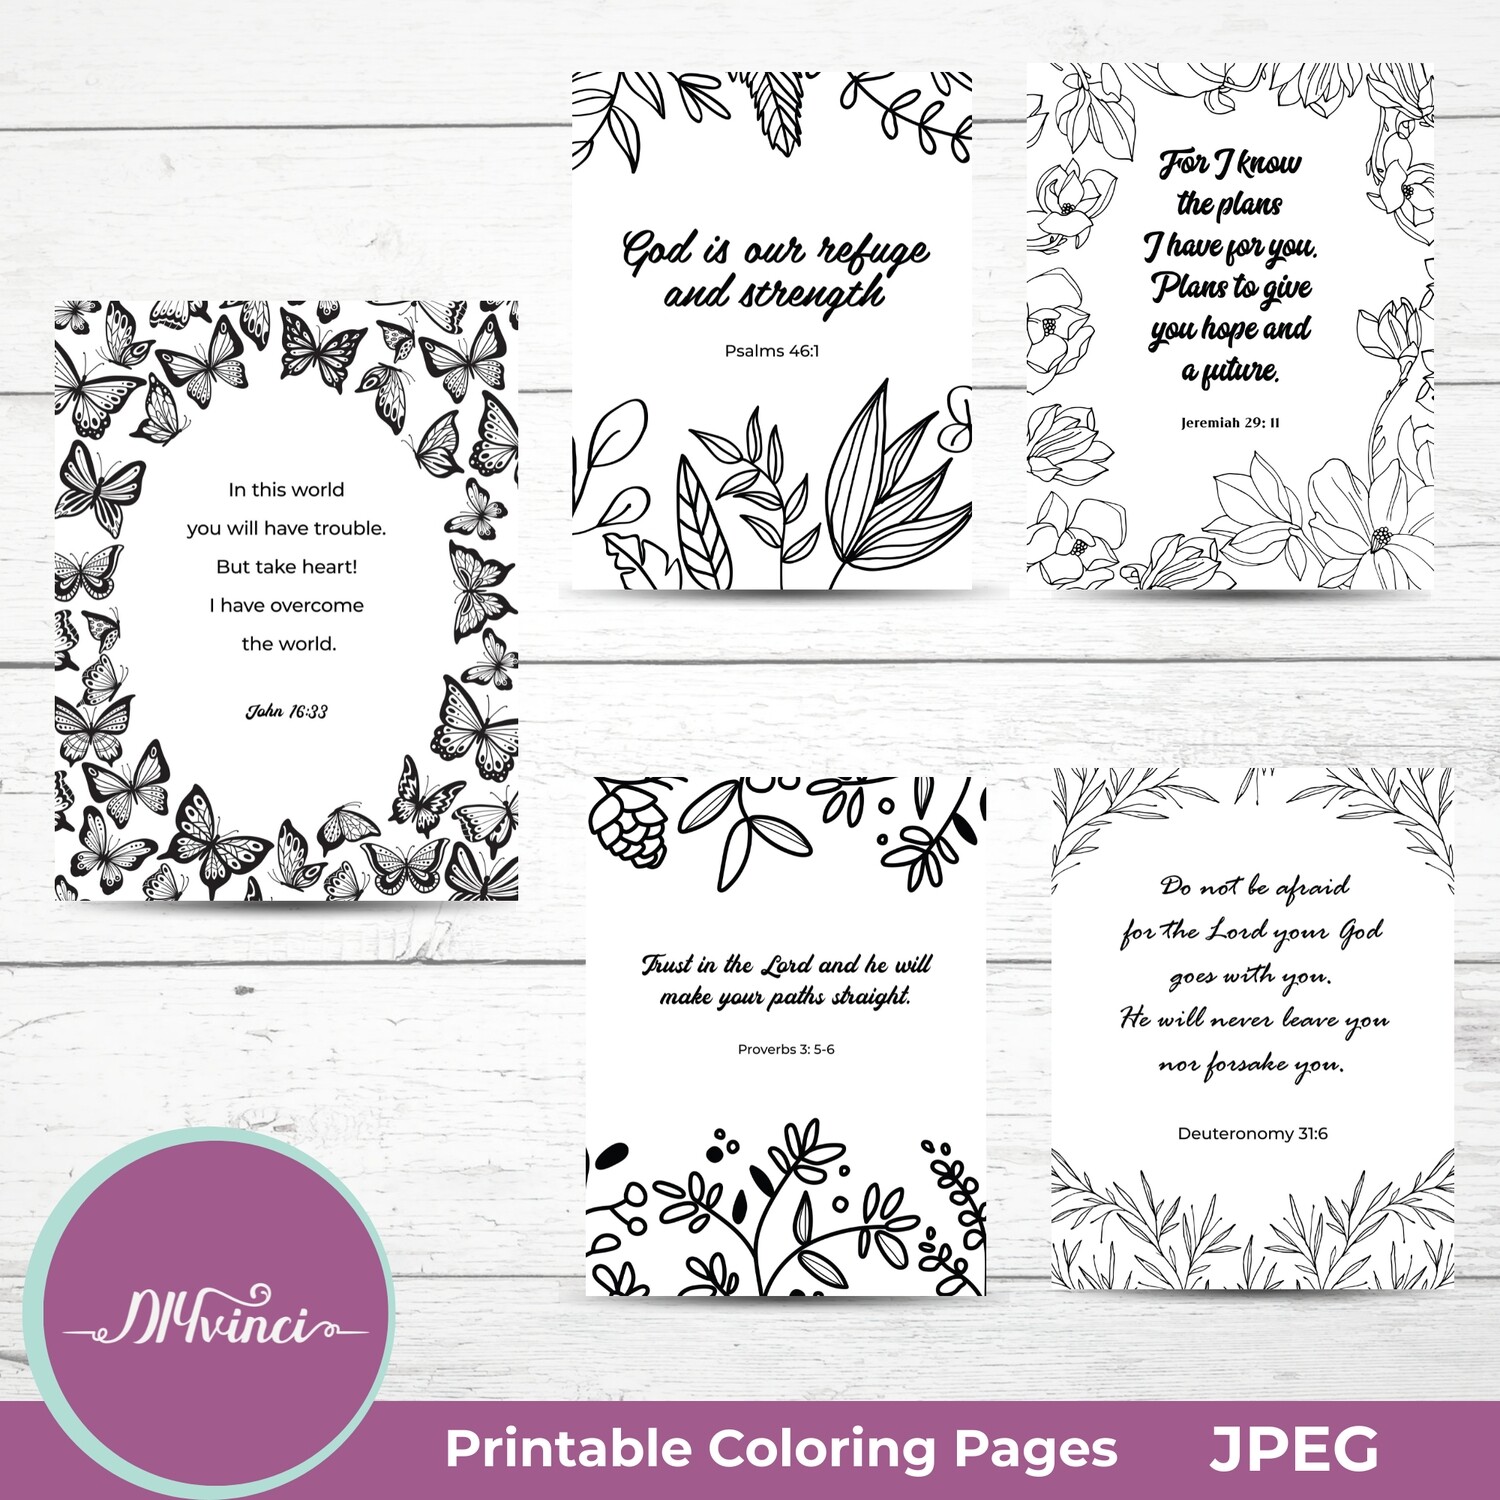 Printable Bible Verse Coloring Pages - 5 JPEG - Personal & Commercial Use